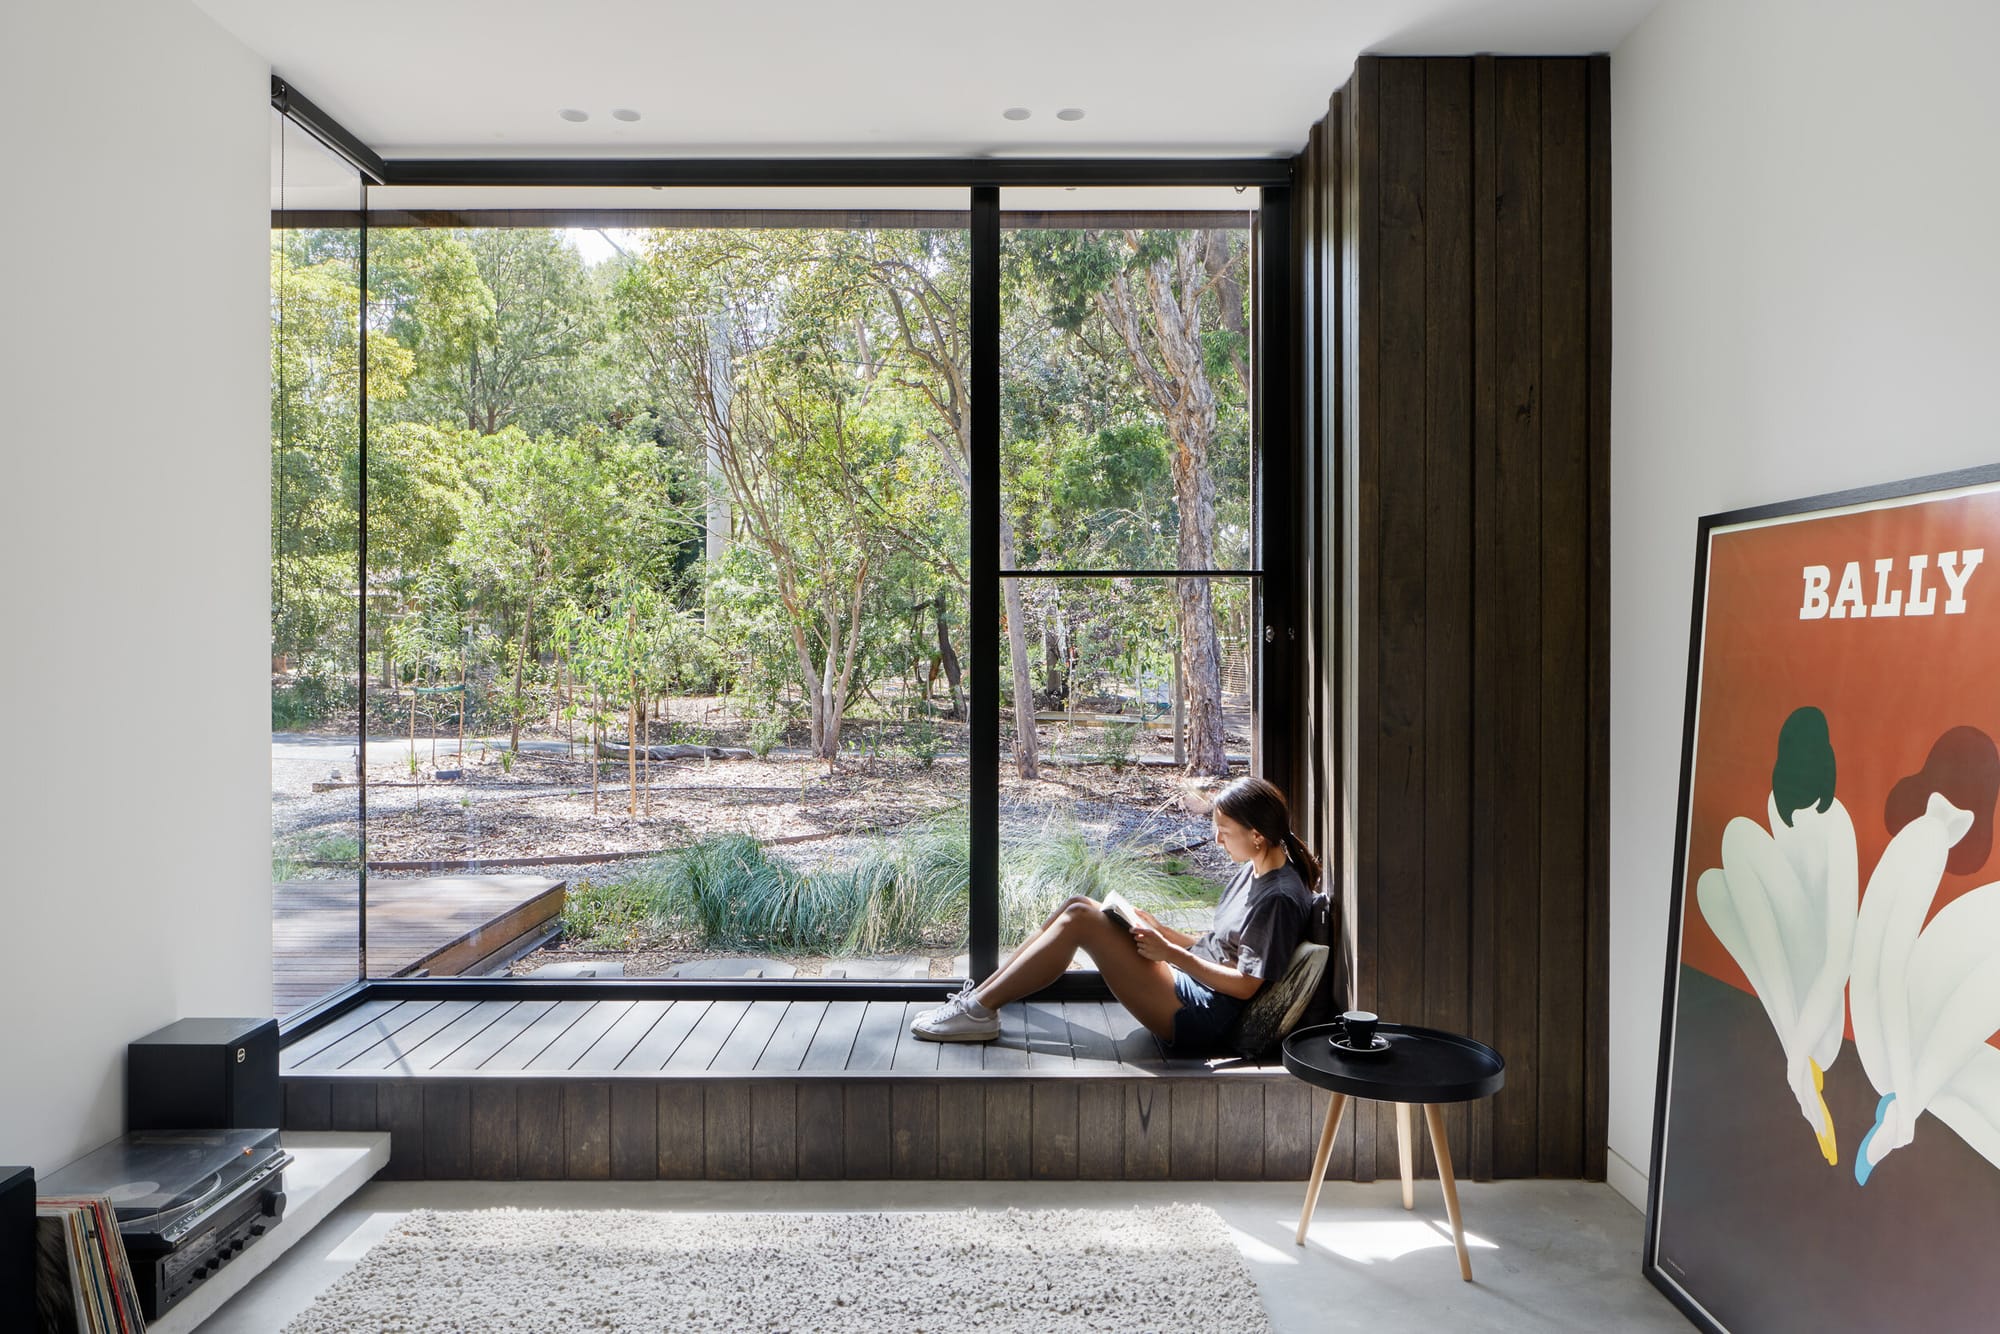 Laurel Grove by Kirsten Johnstone Architecture. Photography by Tatjana Plitt. Large window overlooks bushland surrounding house. Young girl sits on timber bench seat running underneath interior window. 